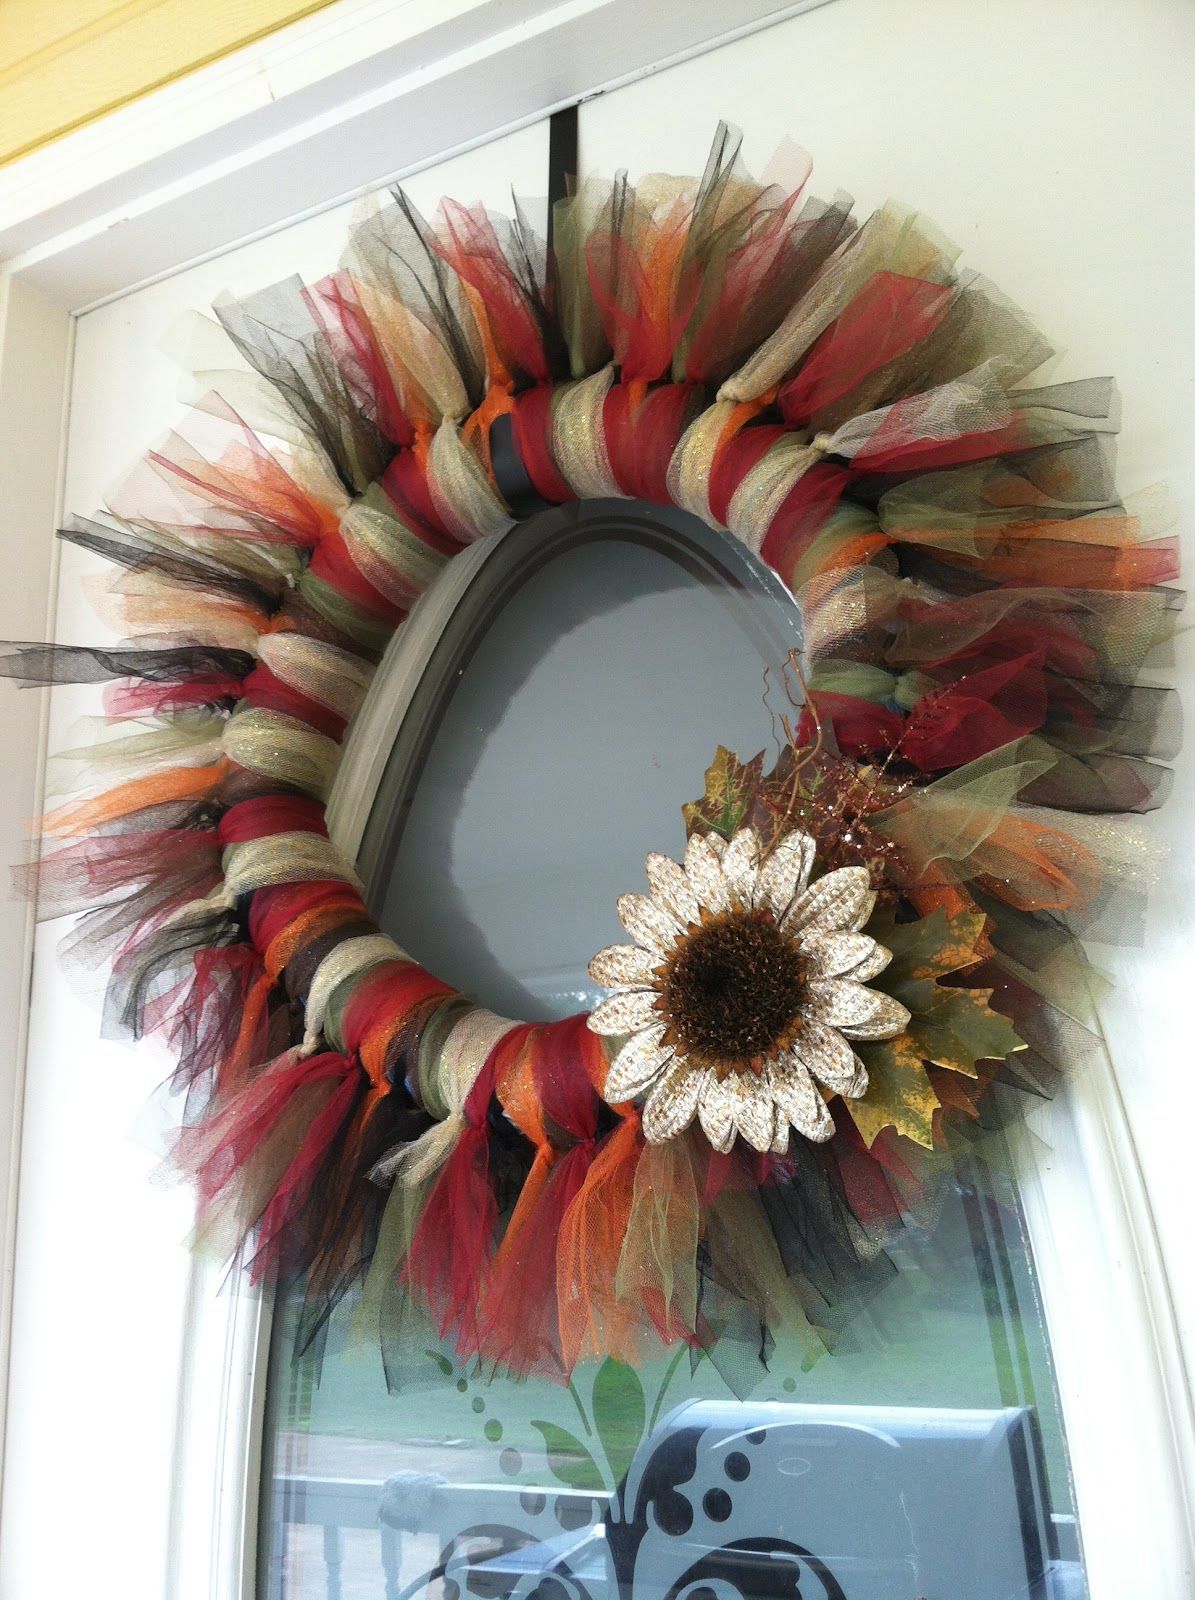 Candice Craves: Making a Tulle Wreath (fun noodle duct-taped, wrap noodle with ribbon/fabric before tulling) — use different